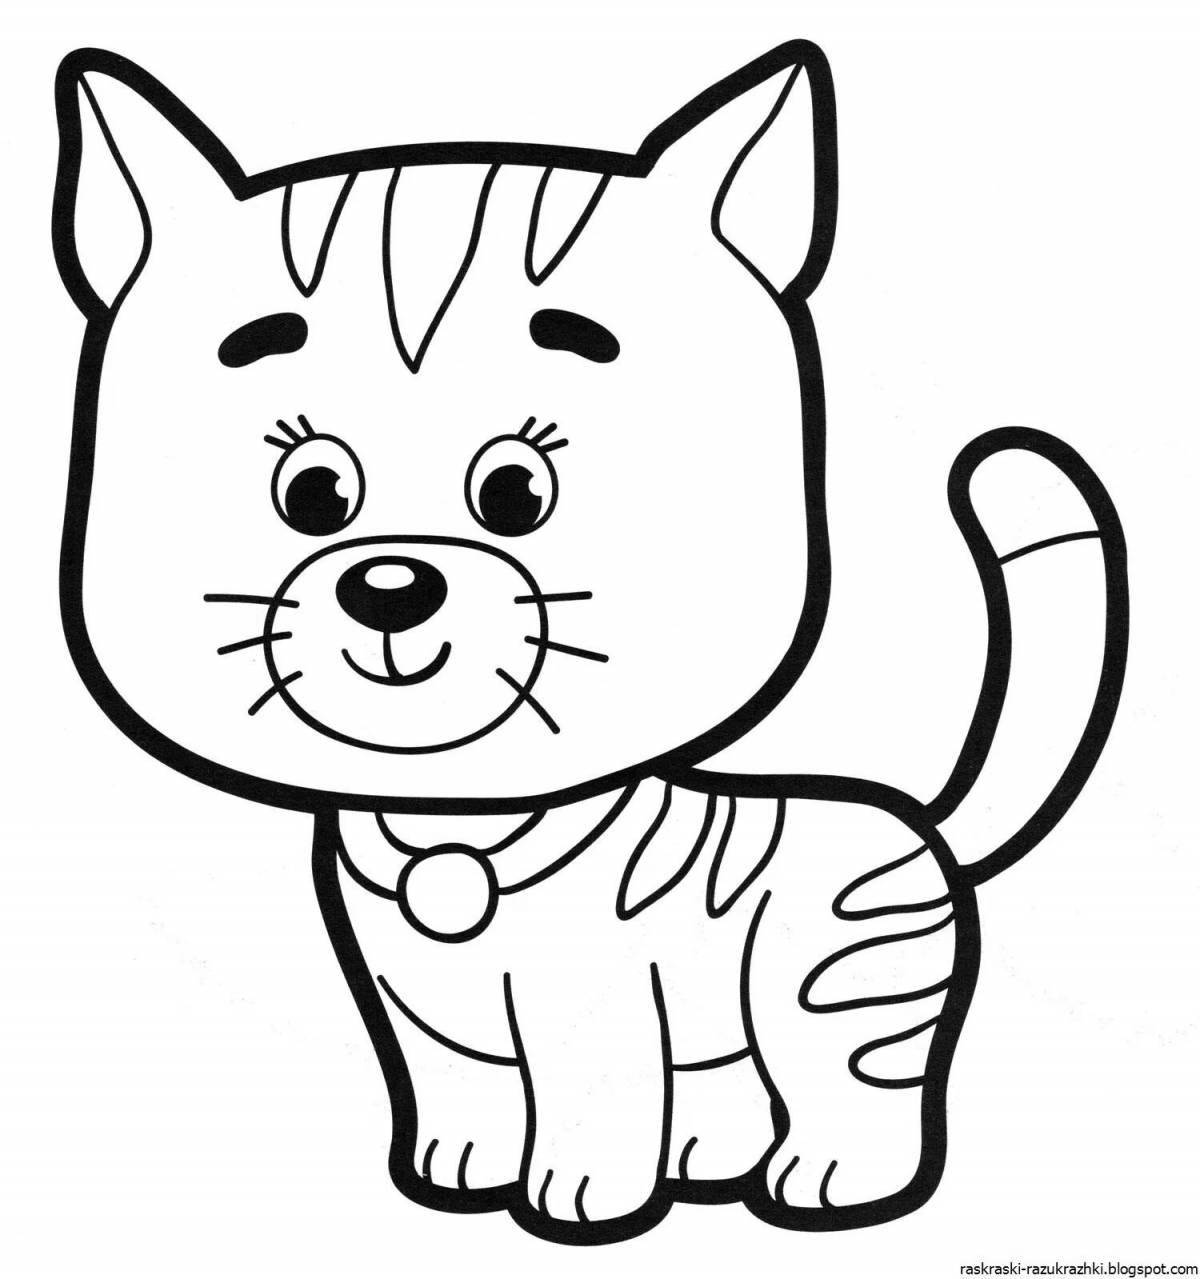 Coloring fluffy cat for kids